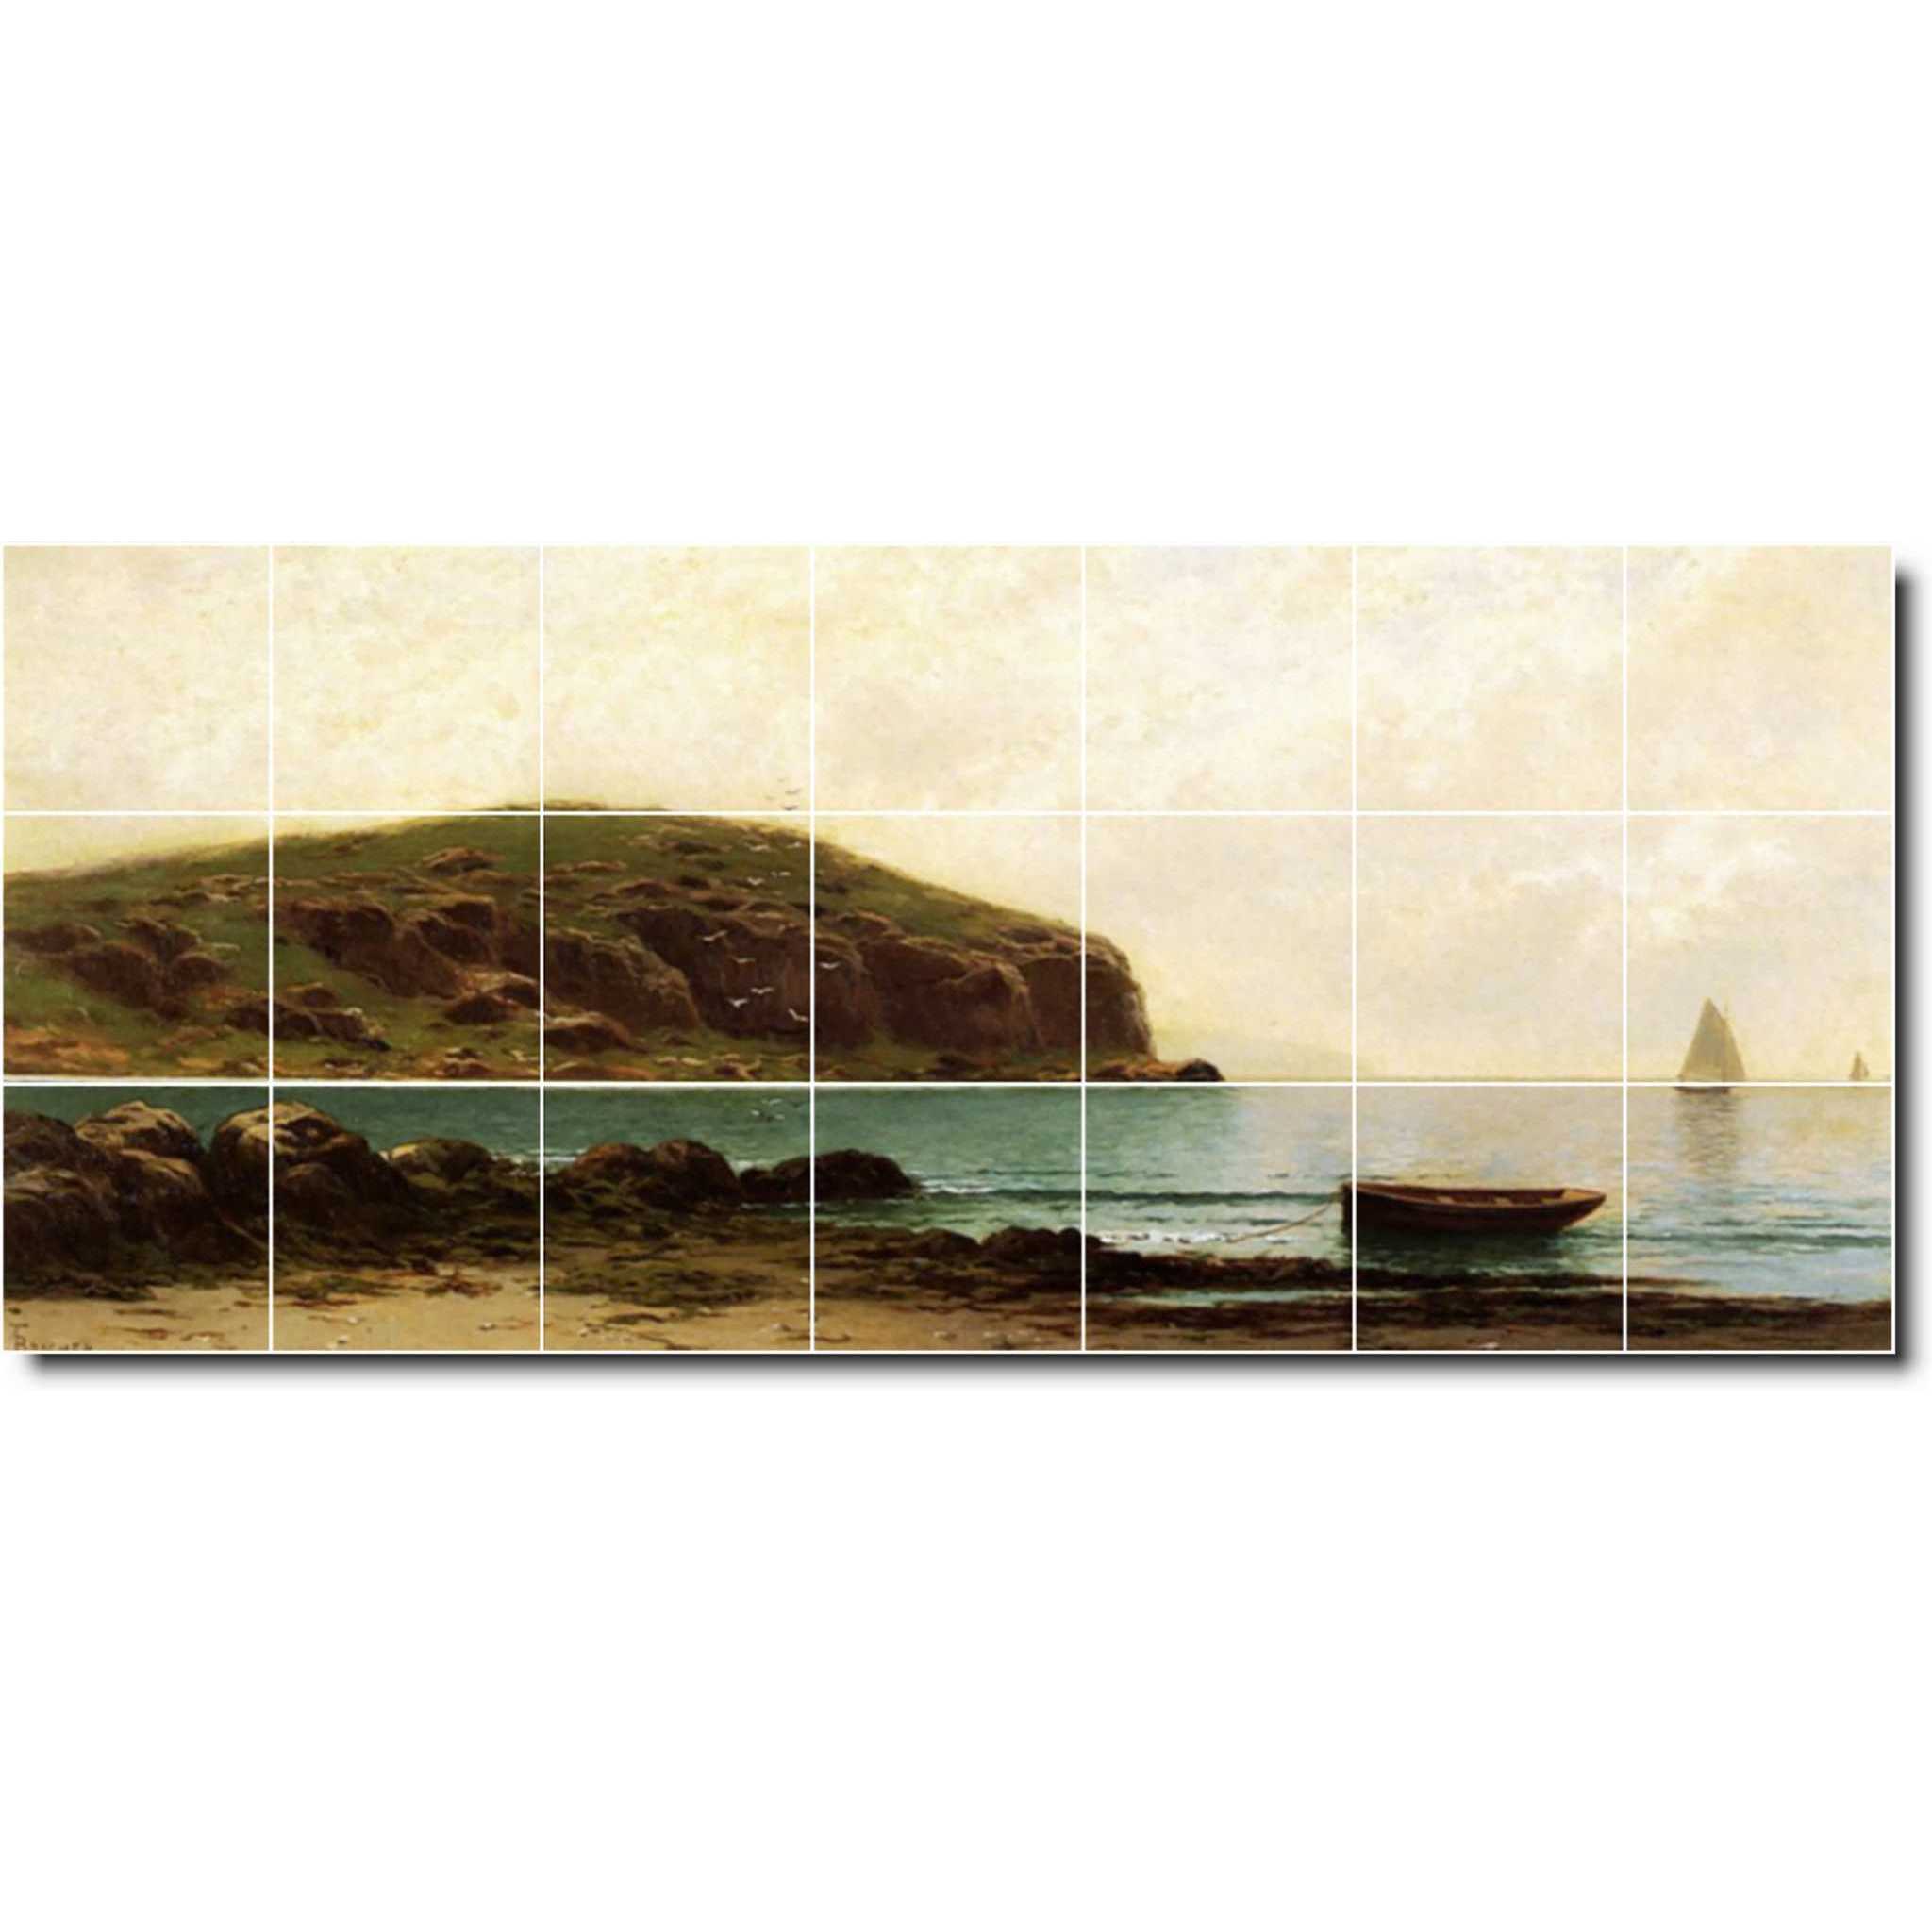 alfred bricher waterfront painting ceramic tile mural p01035